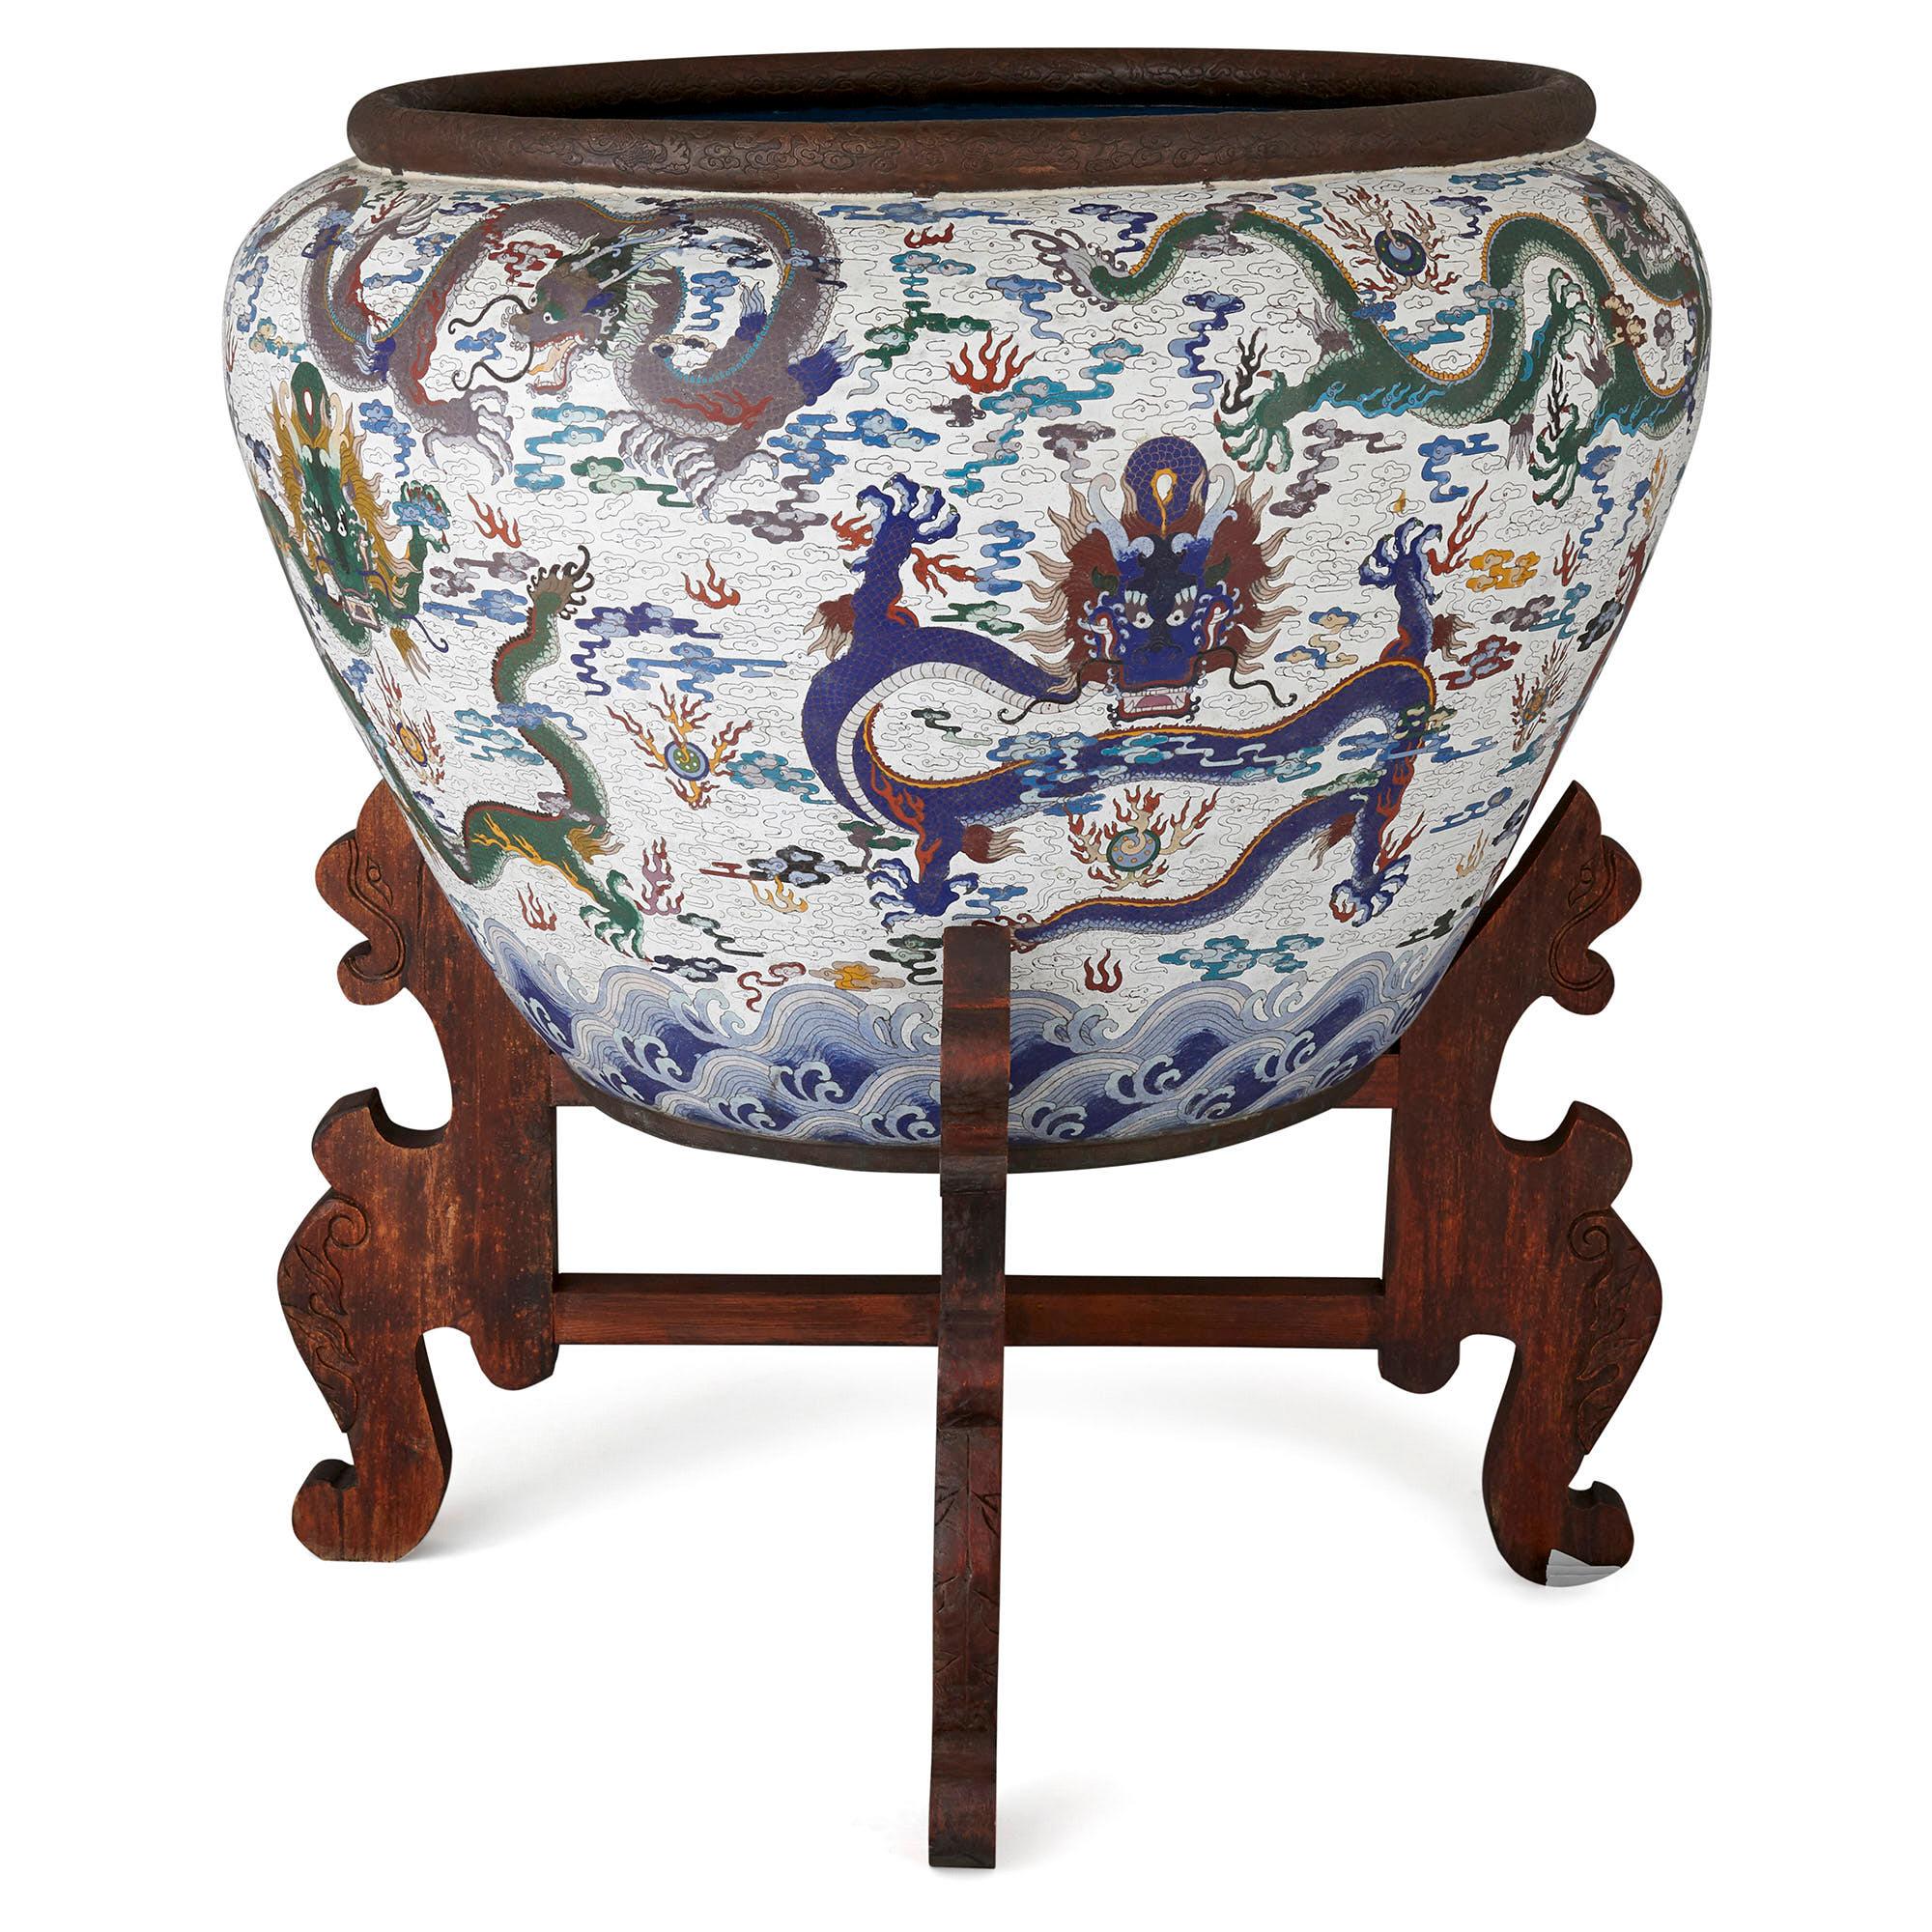 Very large Chinese enamel jardinière on hardwood stand
Chinese, 20th century
Measures: Height 127cm, diameter 116cm

This exceptionally large cloisonné enamel jardinière is a superb example of 20th century Chinese design. The jardinière is of